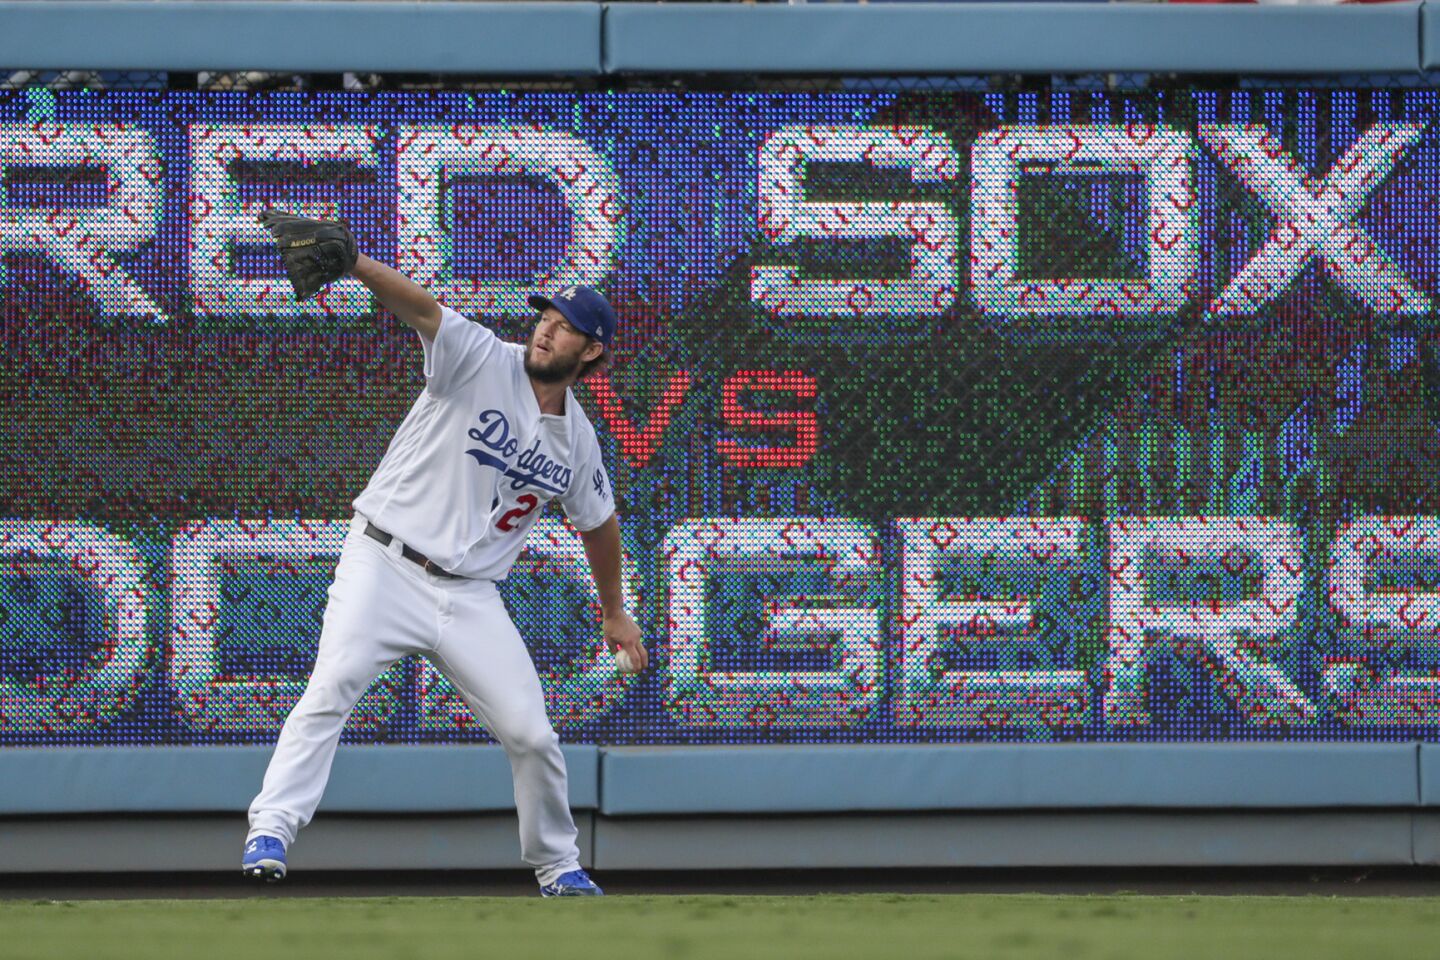 Dodgers ace Clayton Kershaw warms up in the outfield before facing the Red Sox in Game 5 of the World Series.